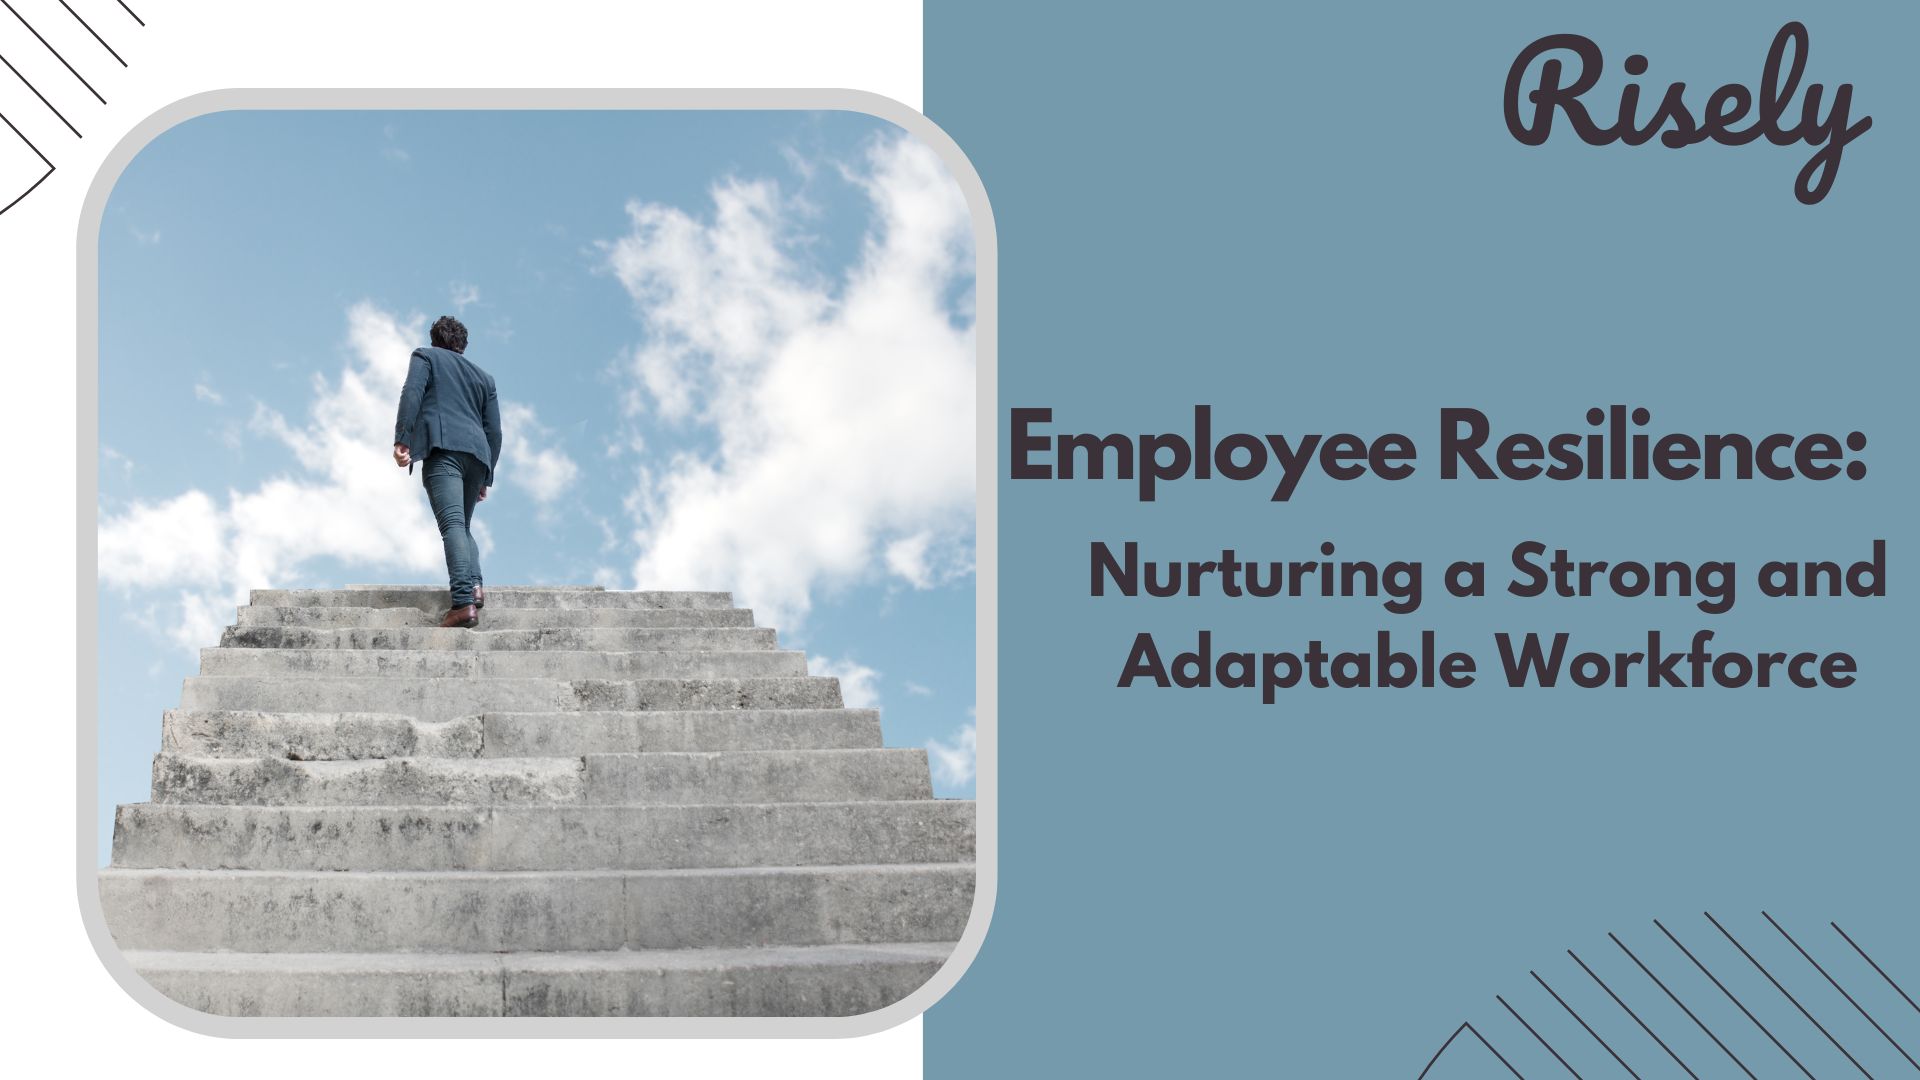 Employee Resilience: Nurturing a Strong and Adaptable Workforce